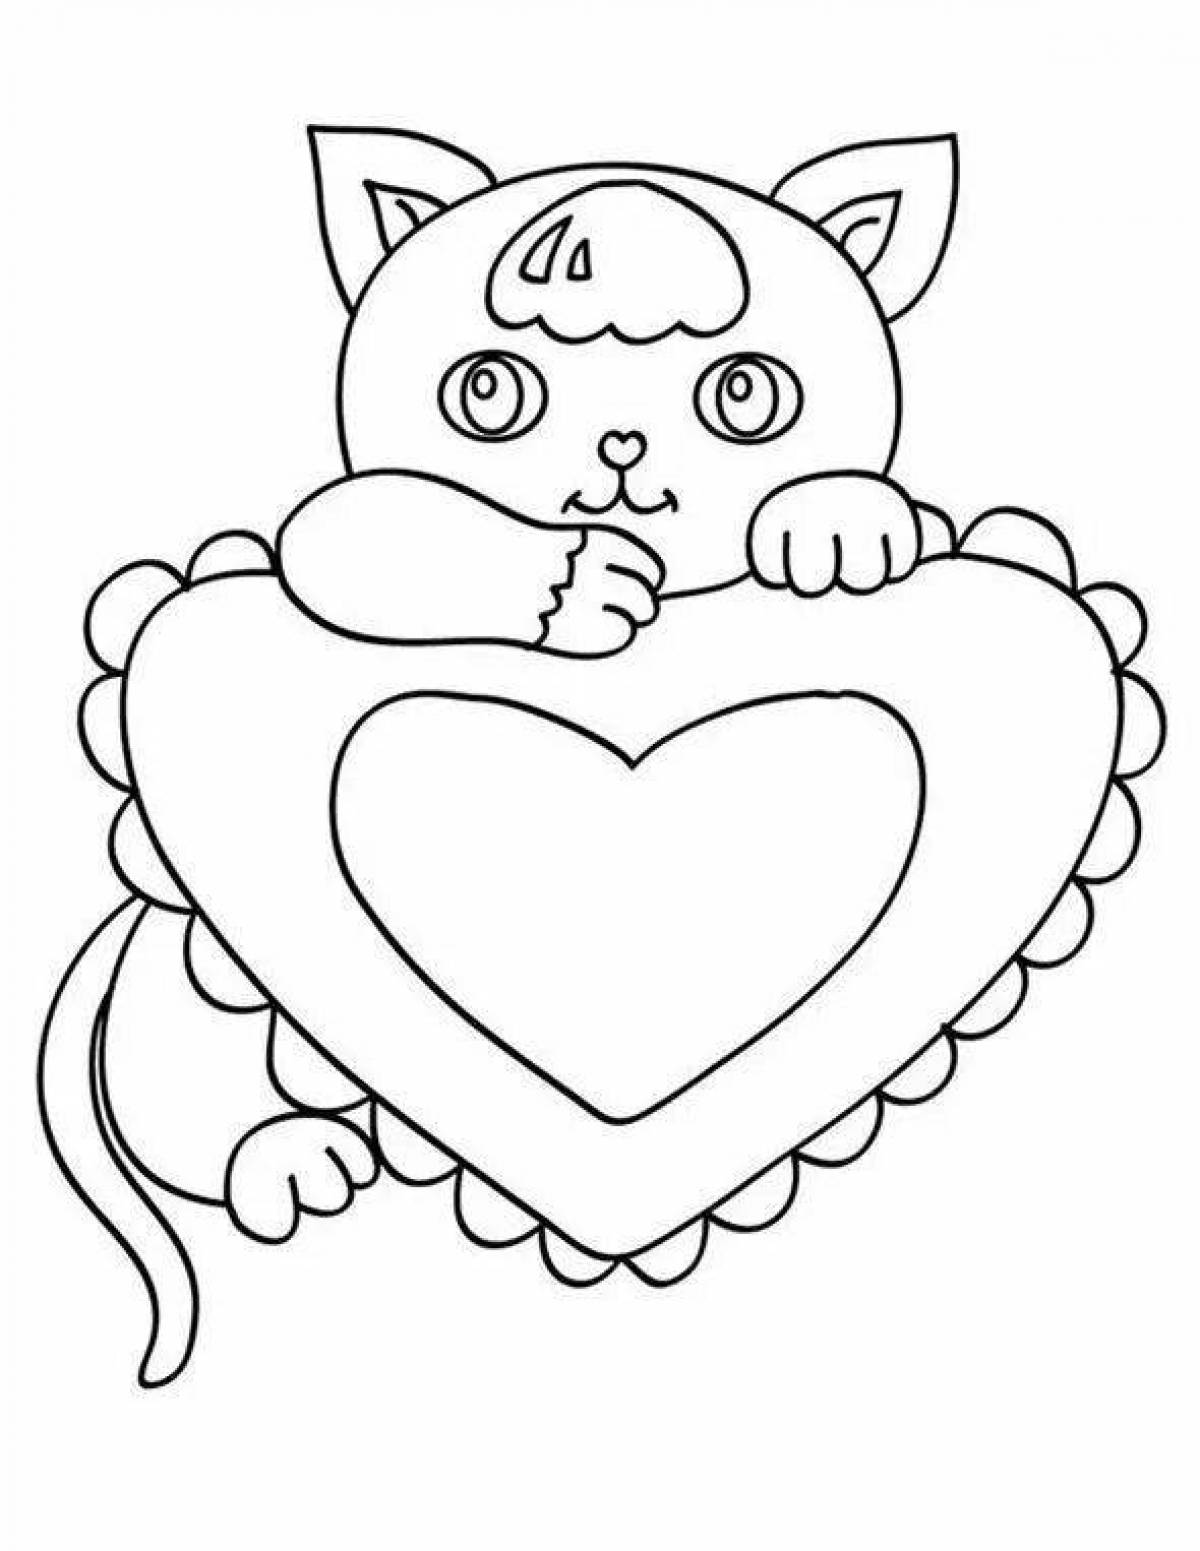 Cat with heart #2